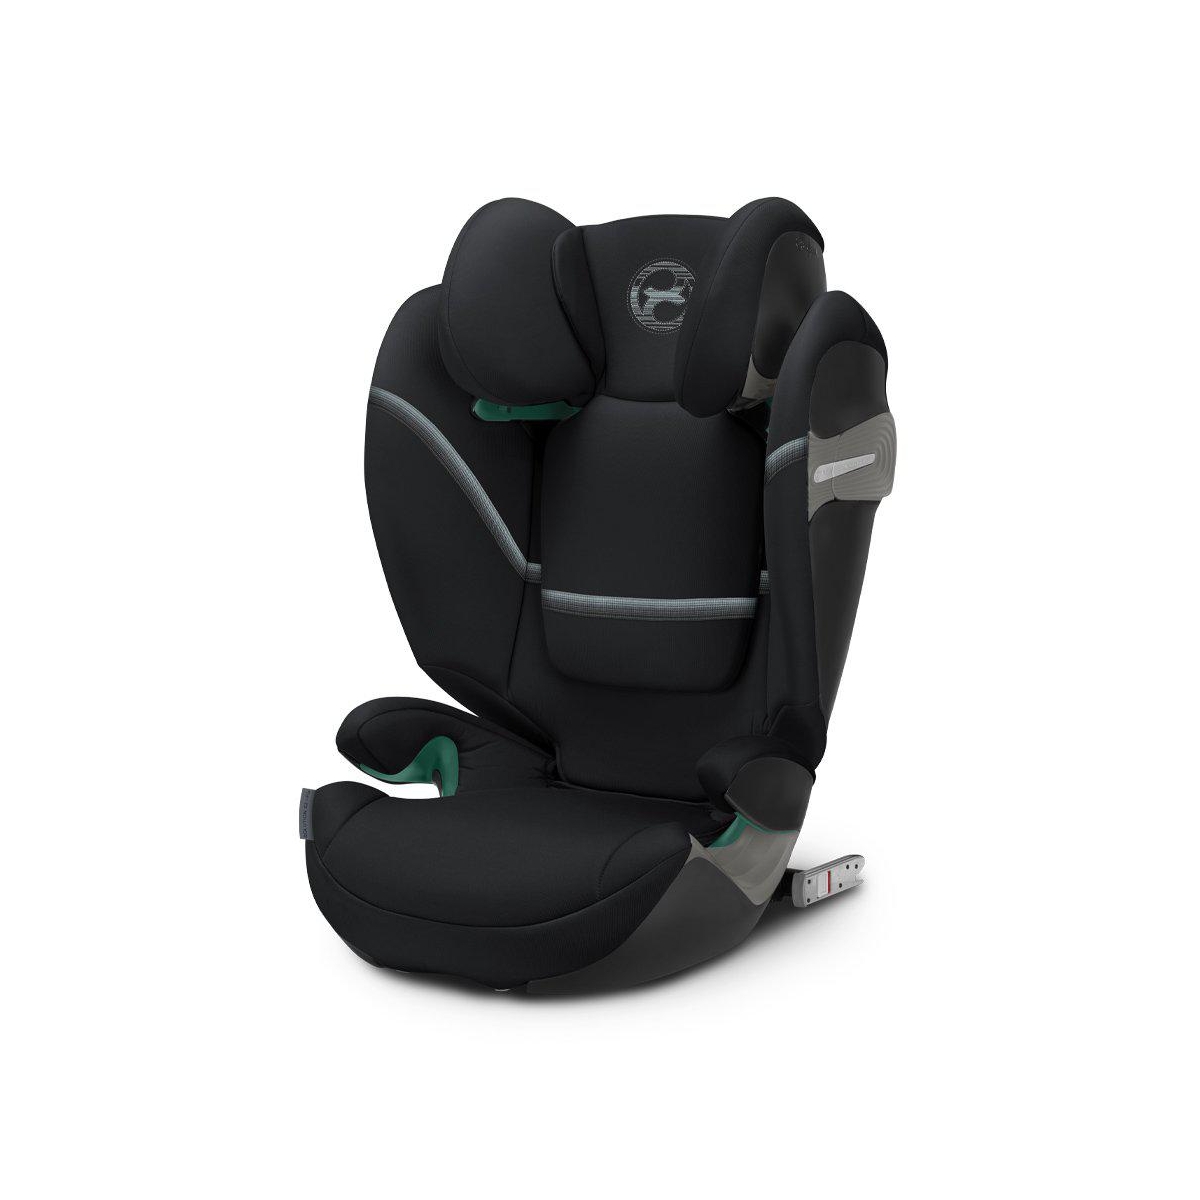 Cybex Solution S2 i-Fix Group 2/3 Car Seat